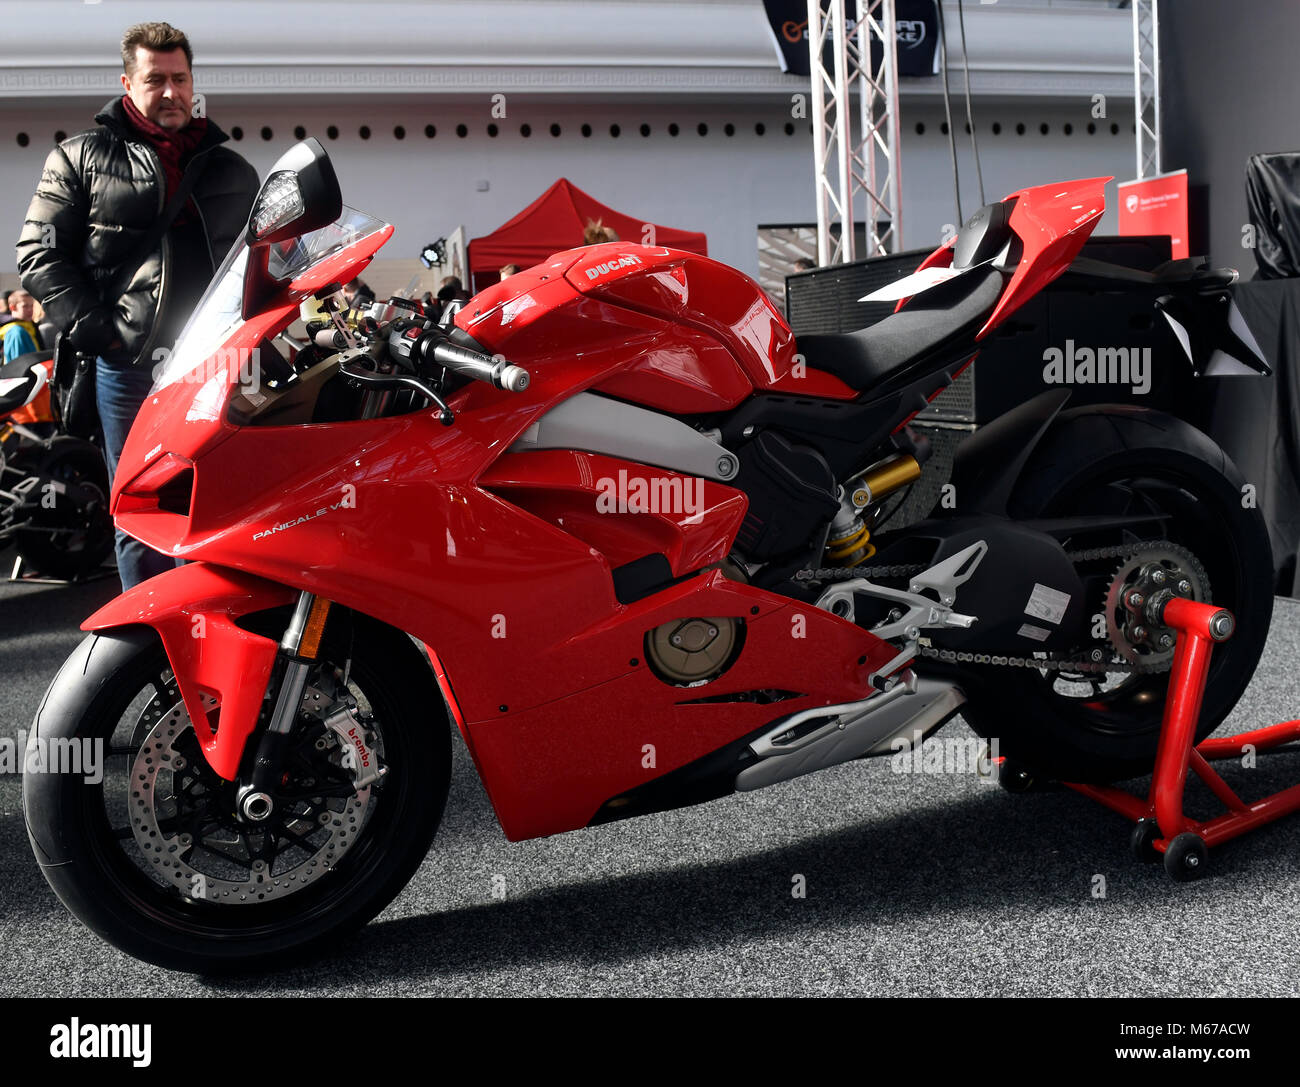 Prague, Czech Republic. 01st Mar, 2018. DUCATI PANIGALE V4 motorcycle is seen during the first day of the traditional fair and exhibition of motorcycles and moto equipment named Motocykl (Motorcycle) in Prague, Czech Republic, on March 1, 2018. Credit: Michal Krumphanzl/CTK Photo/Alamy Live News Stock Photo